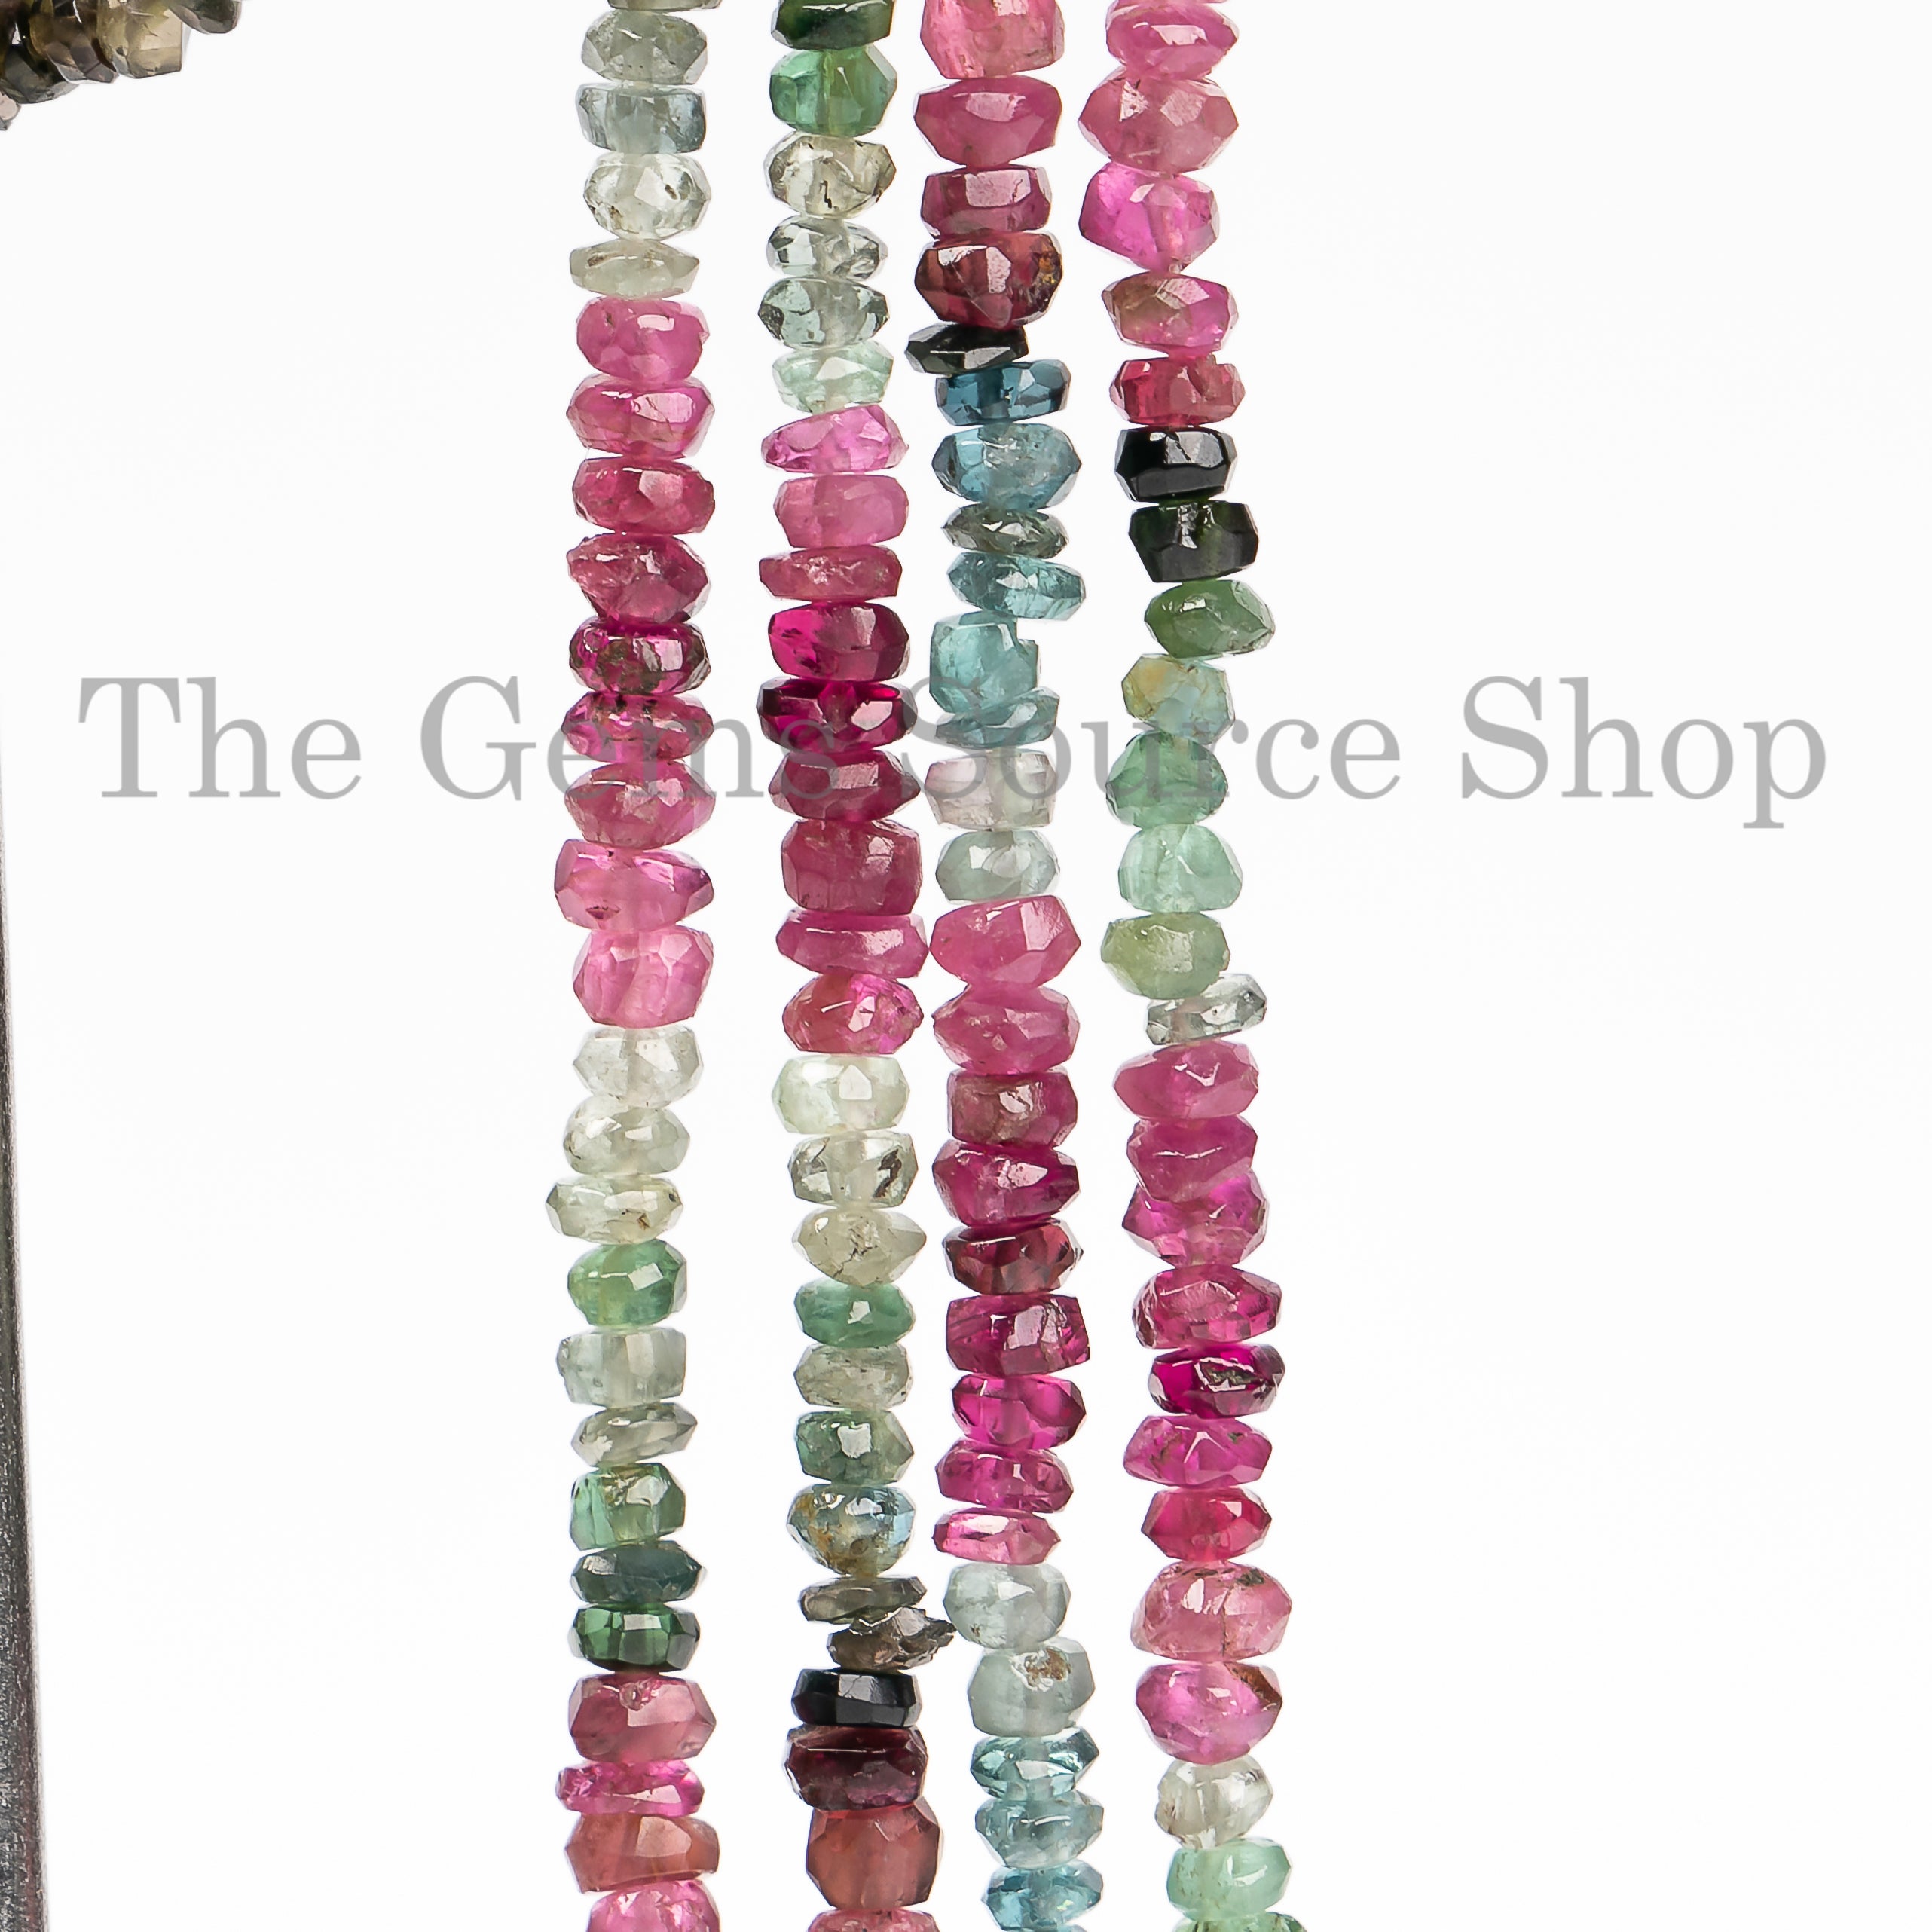 Wholesale Lot Of 3.5mm Multi Tourmaline Beads, Multi Tourmaline Faceted Beads, Tourmaline Rondelle Shape Beads, Gemstone Beads For Necklace